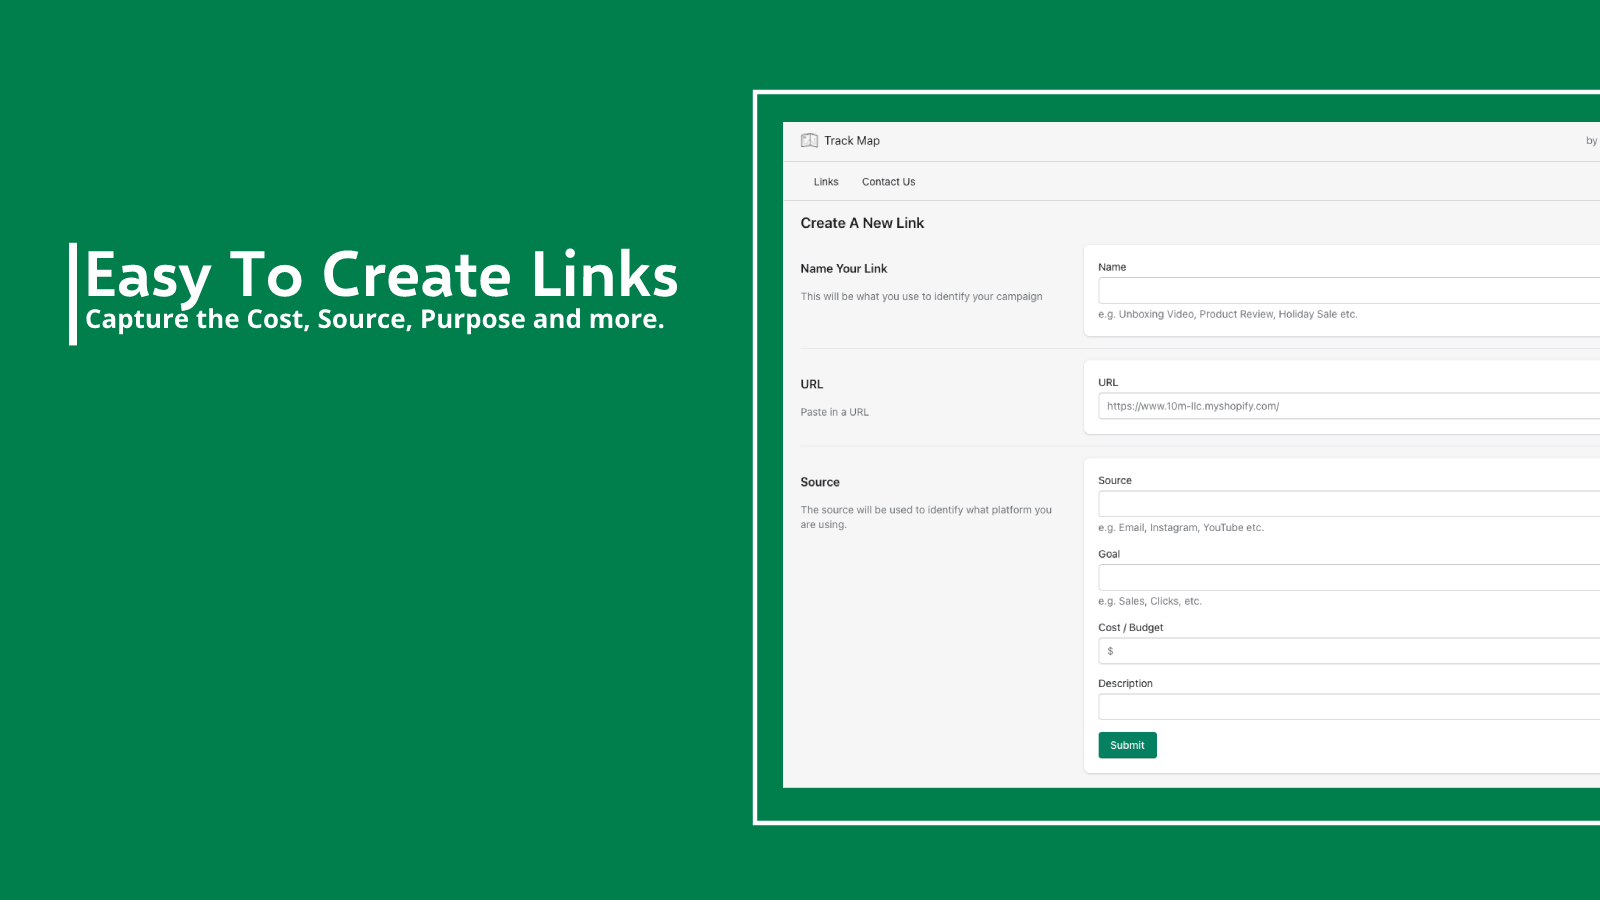 Create links in seconds